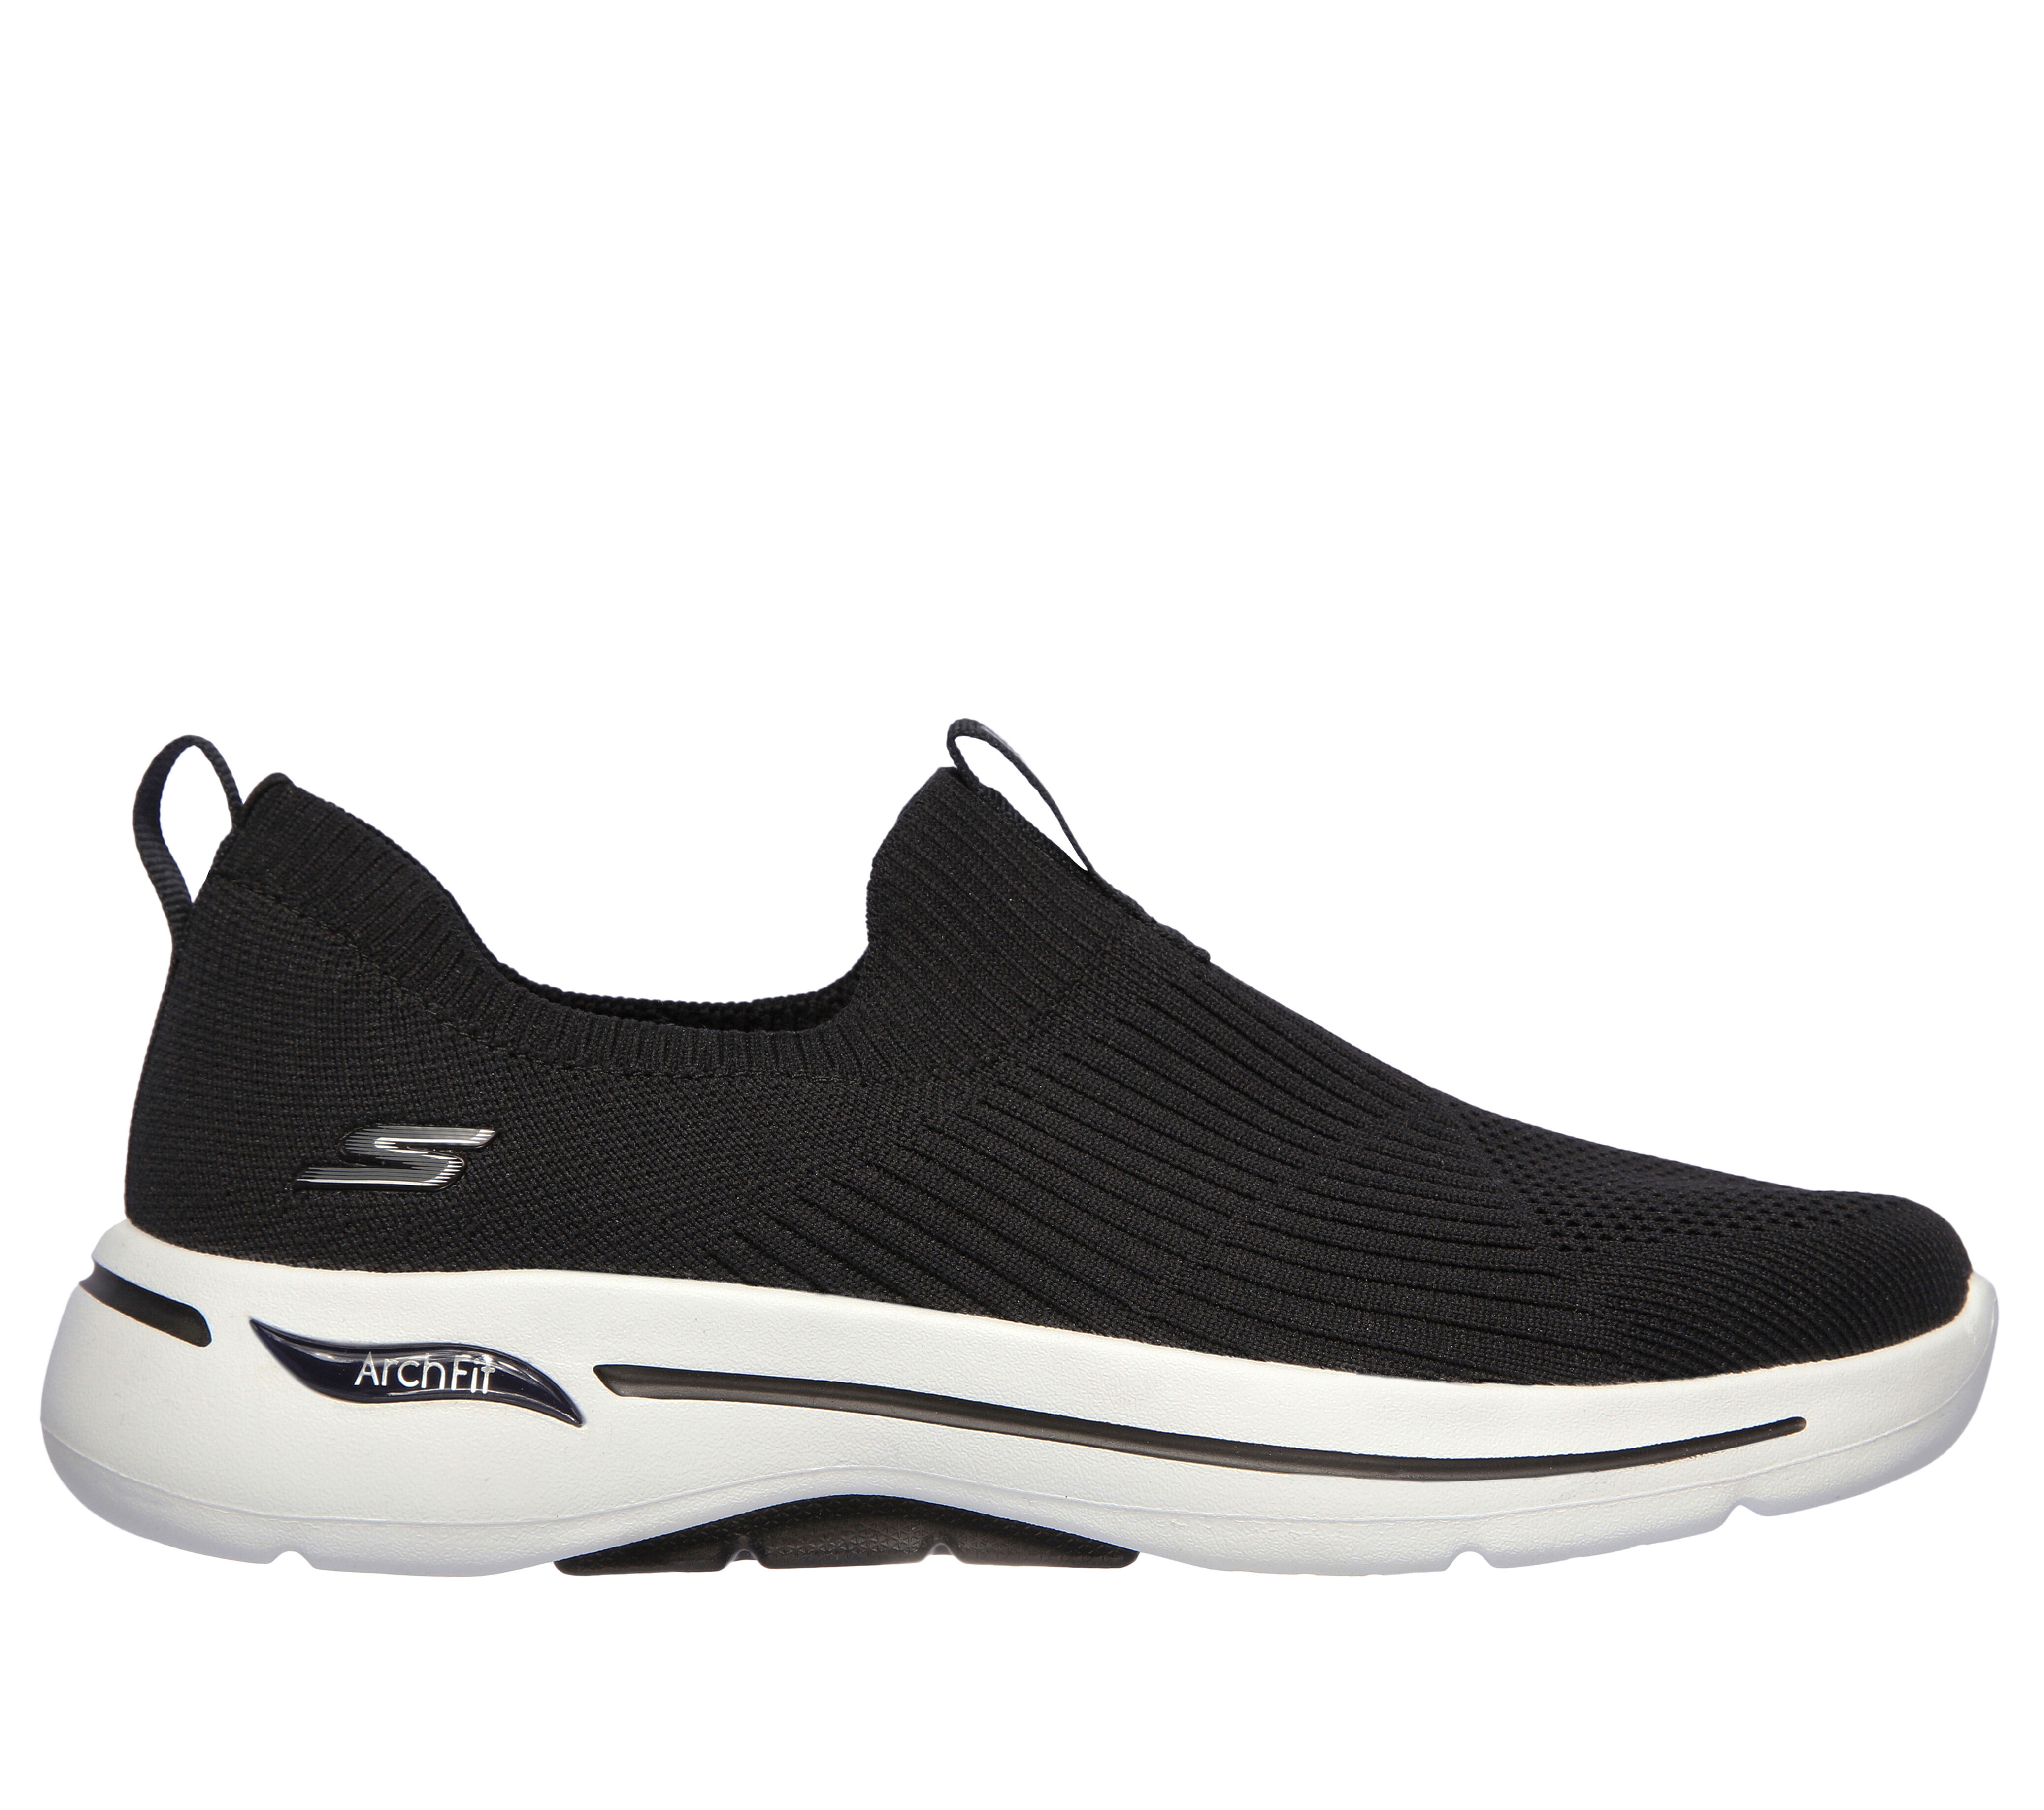 skechers wide fit shoes womens